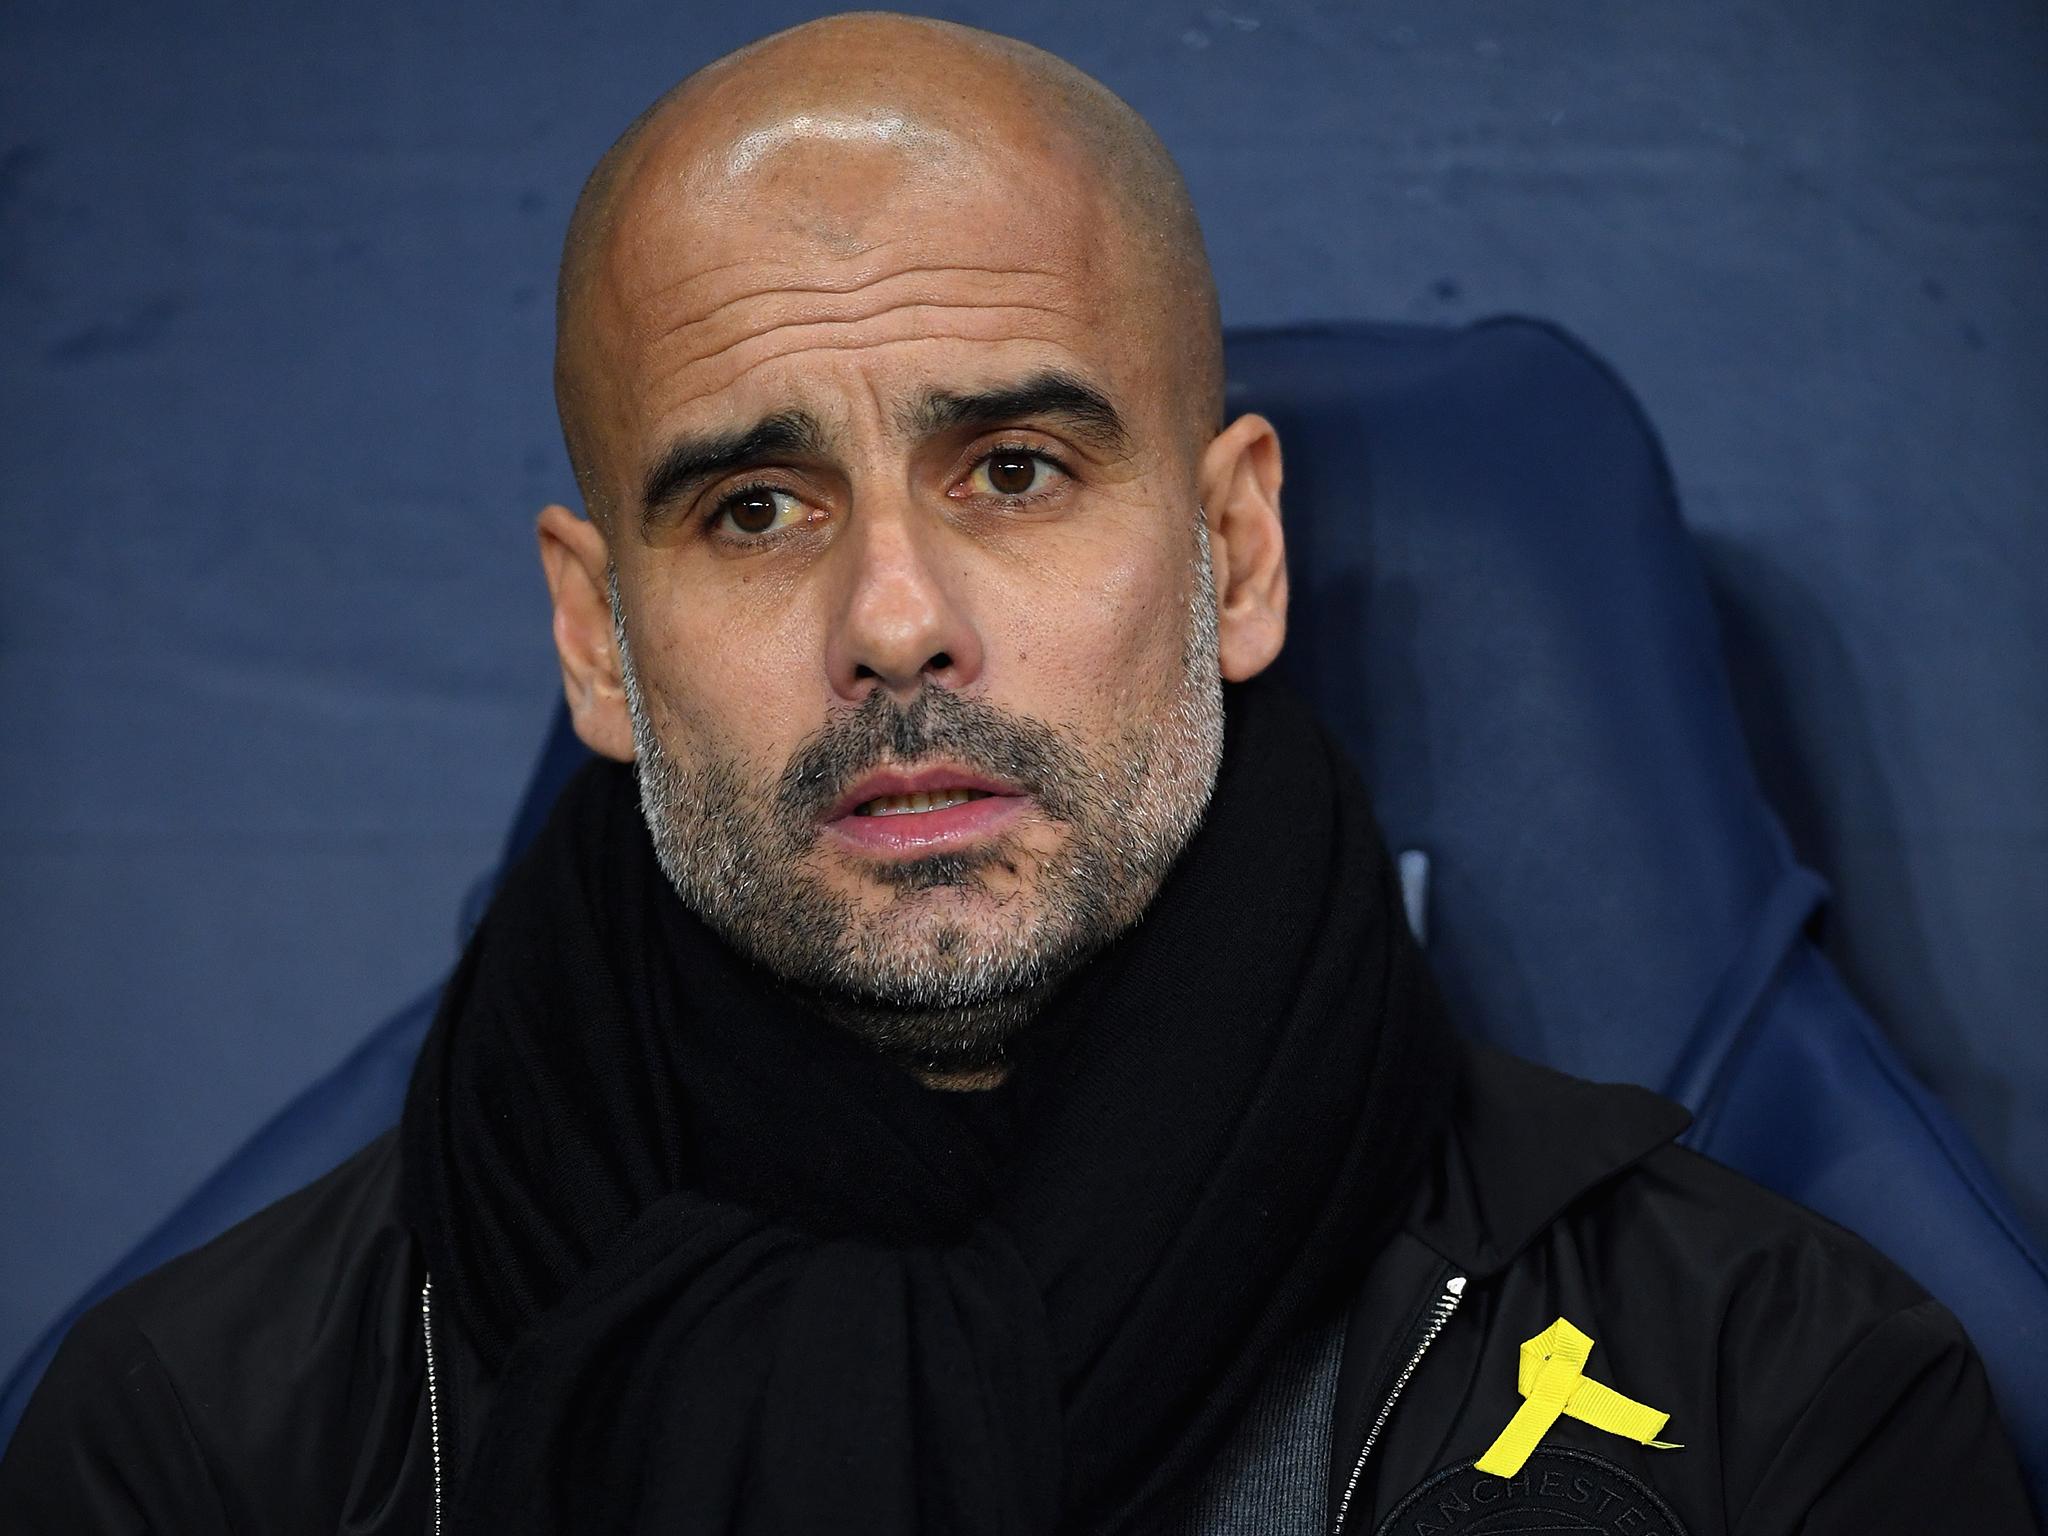 Pep Guardiola has voiced his support for the Catalonian independence campaign